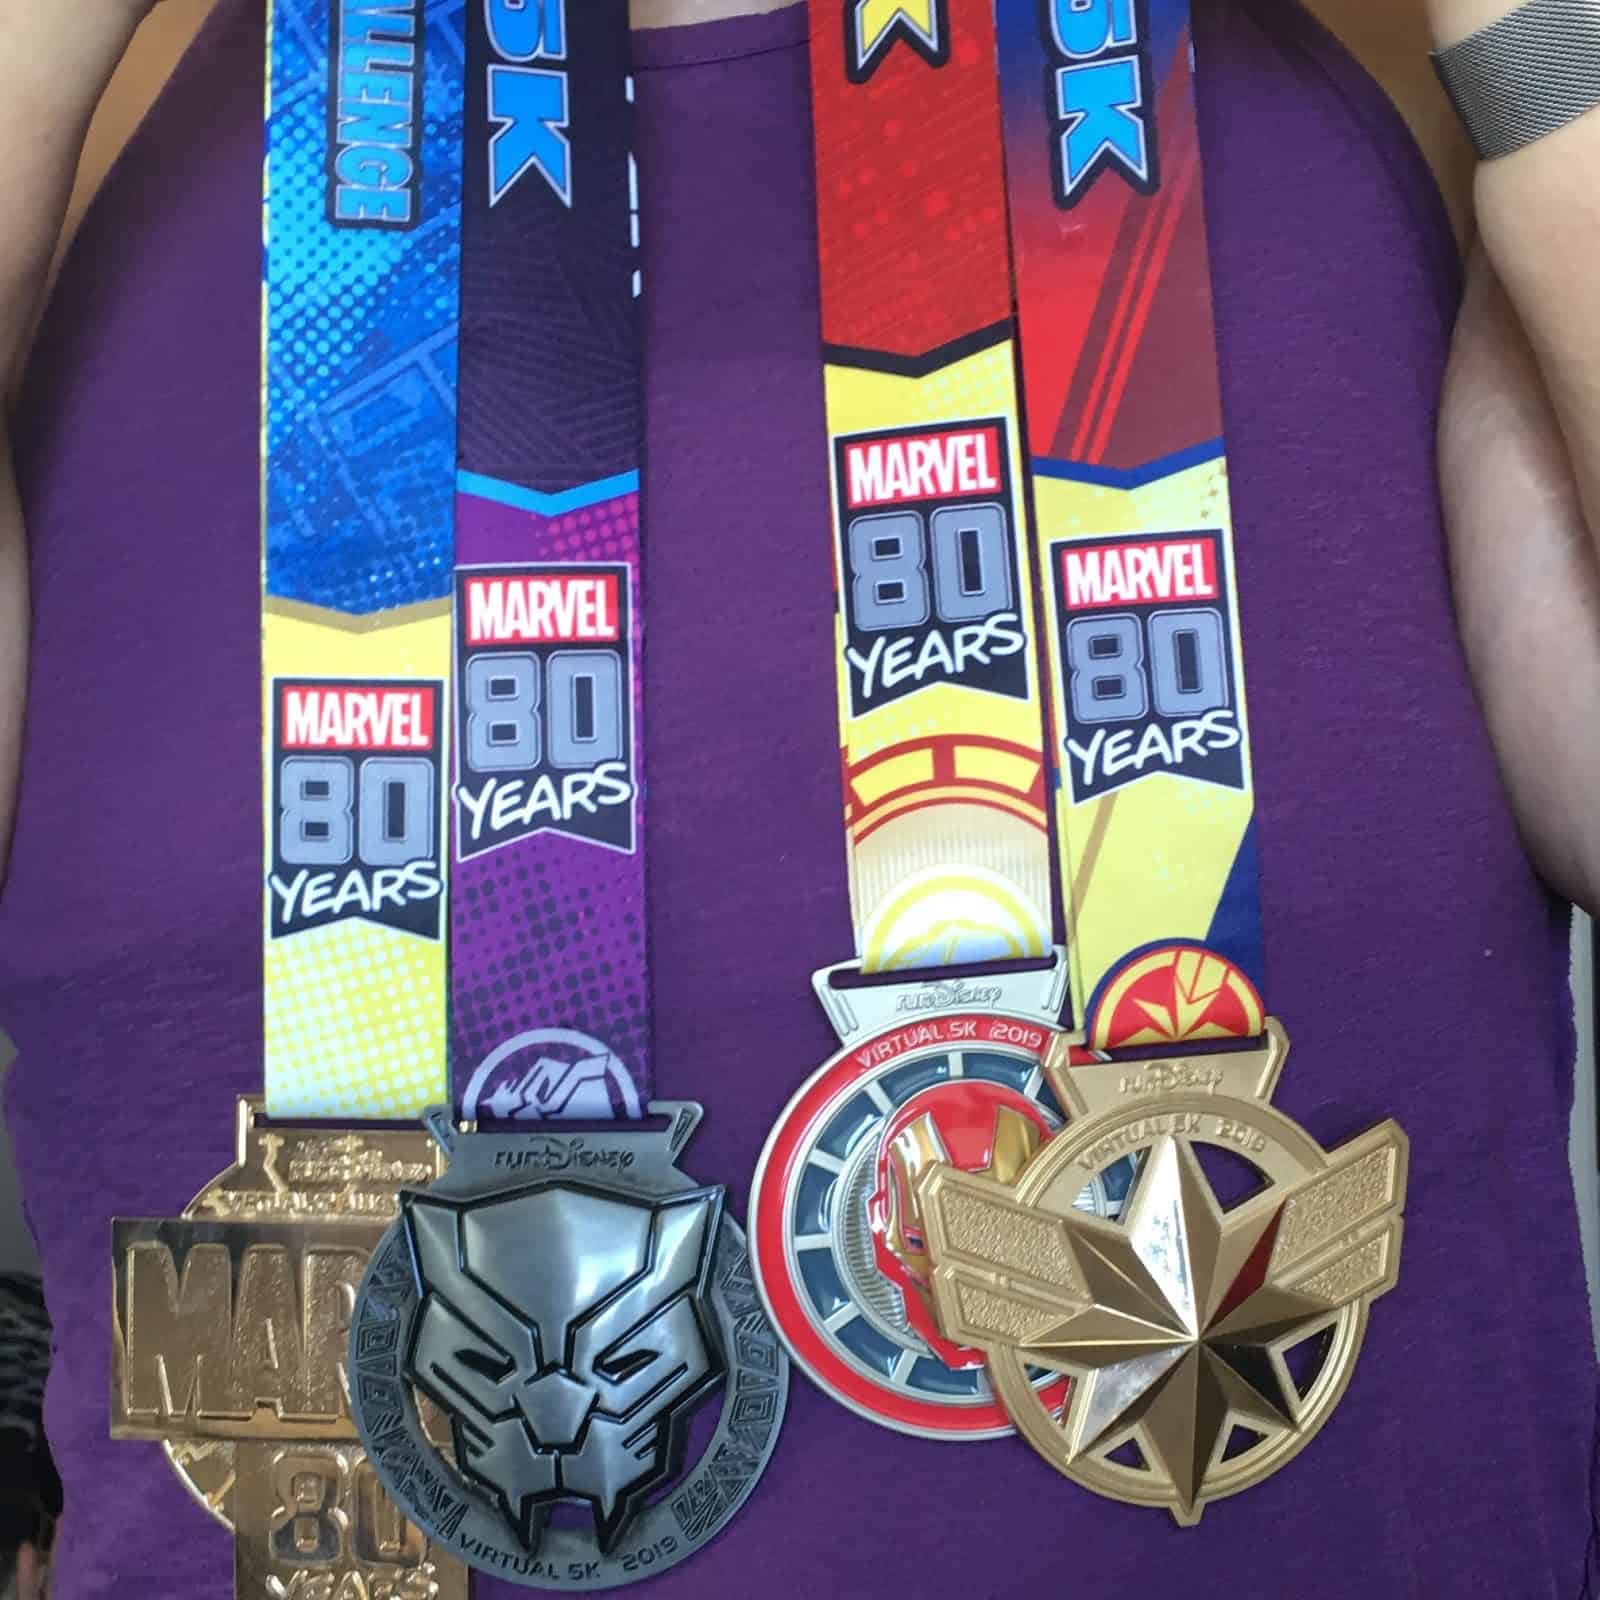 Set of 4 race medals from the virtual 5K races